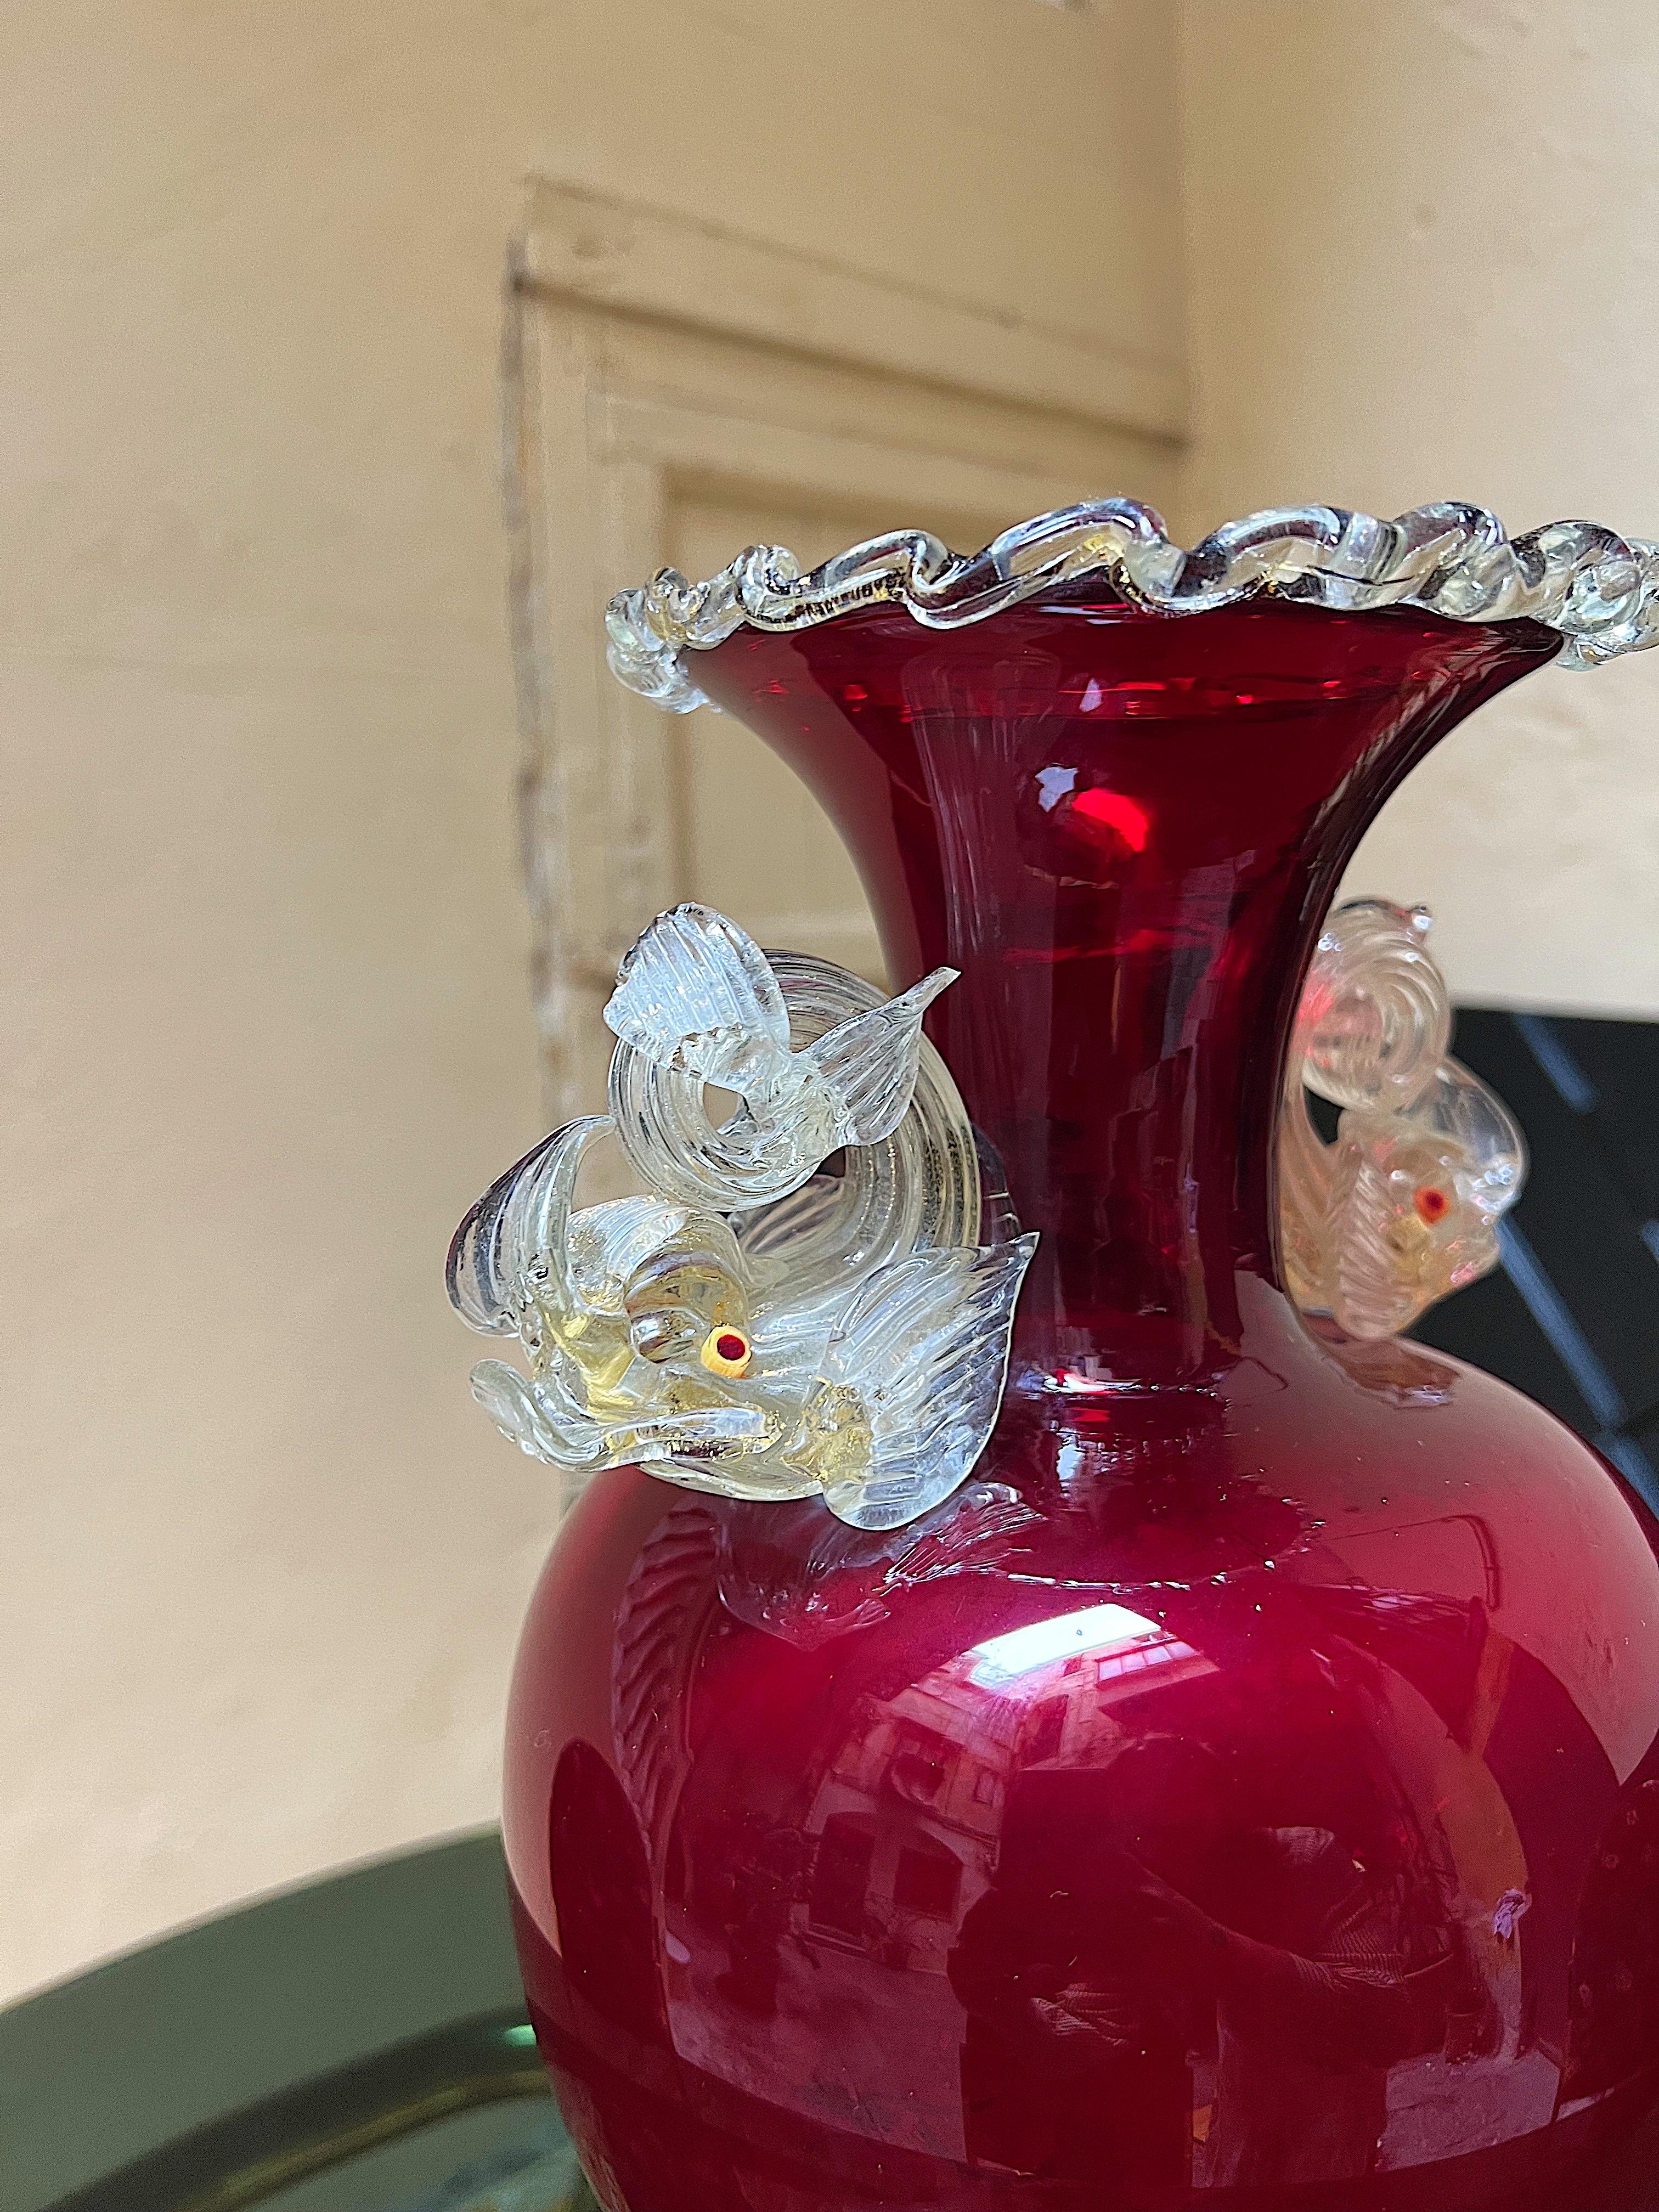 An exceptional example of Venetian glassblowing mastery, this large and impressive vase made by Antonio Salviati is sure to impress! All handblown elements are fused together to create this masterpiece.

 Its in a vibrant apple red, embellished